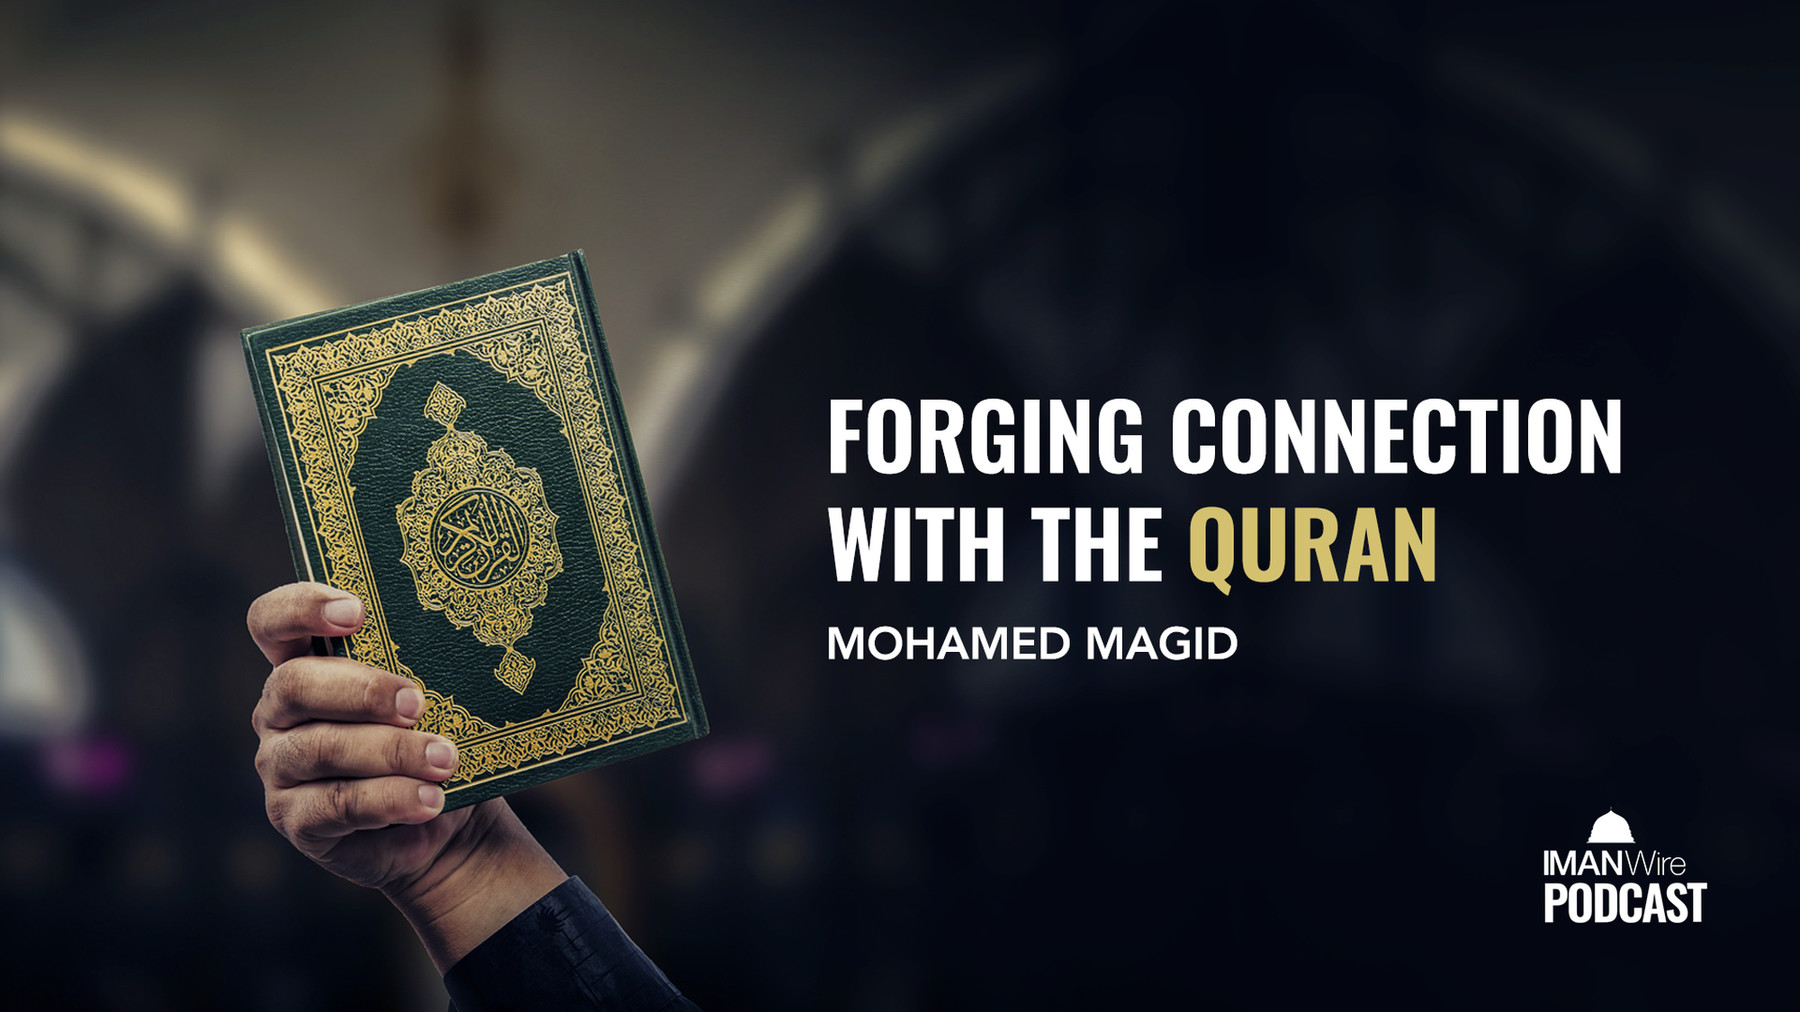 20210104 THUMBNAIL Forging Connection with the Quran 1920x1080